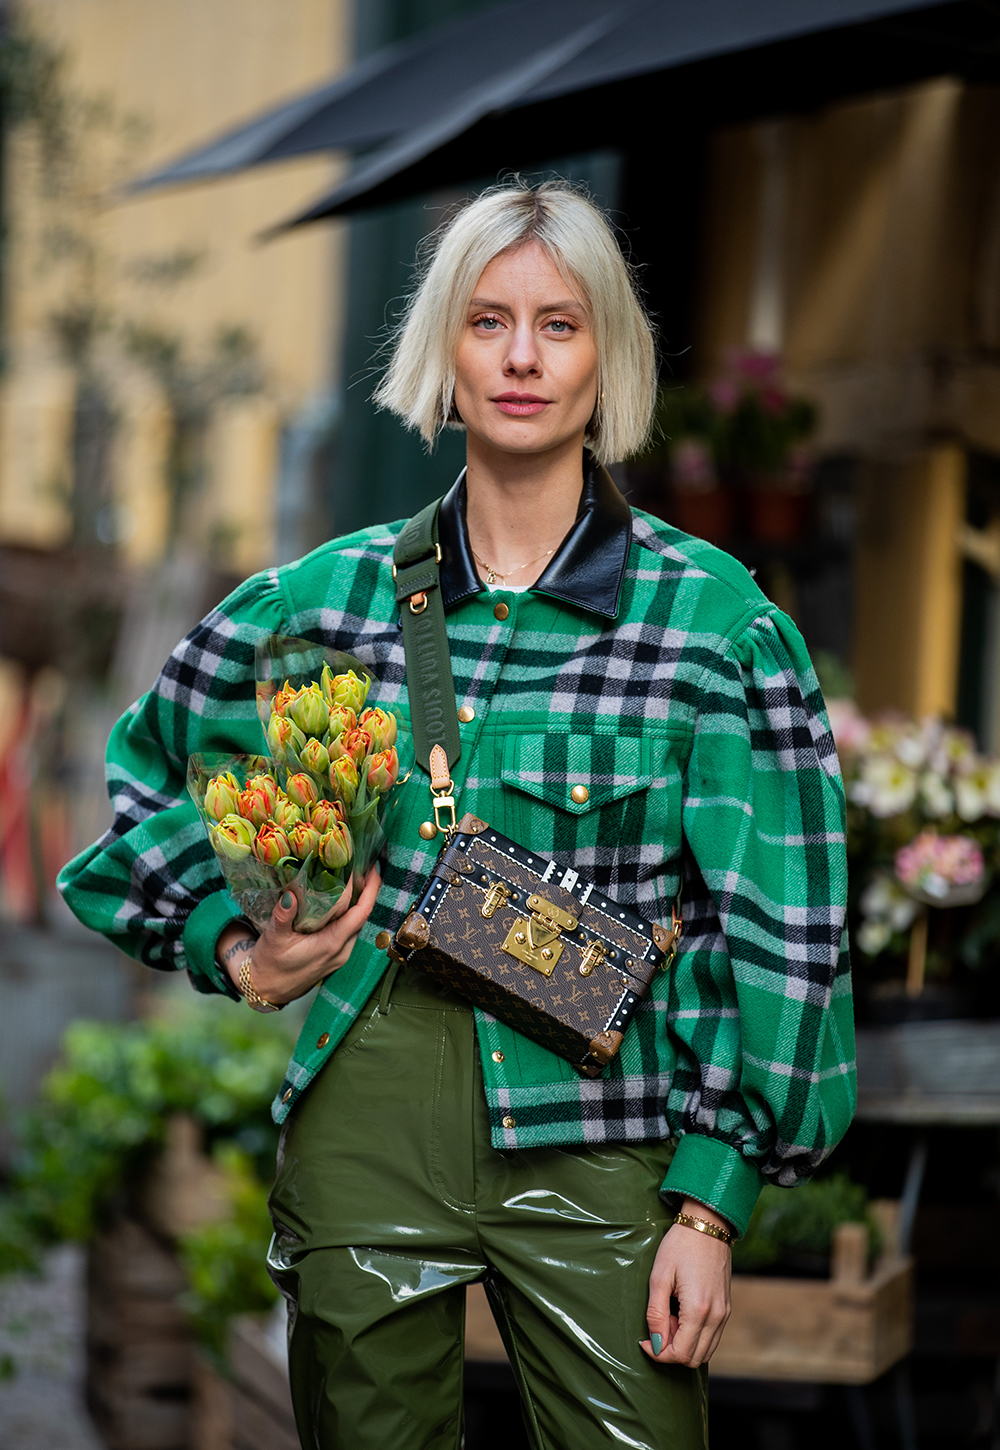 COPENHAGEN, DENMARK - JANUARY 29: Lisa Hahnbueck seen with some flower wearing green checkered Louis Vuitton jacket green shiny patent leather pants Tibi, Üterque boots, LV petite Malle bag during Copenhagen Fashion Week Autumn/Winter 2020 Day 2 on January 29, 2020 in Copenhagen, Denmark. (Photo by Christian Vierig/Getty Images)